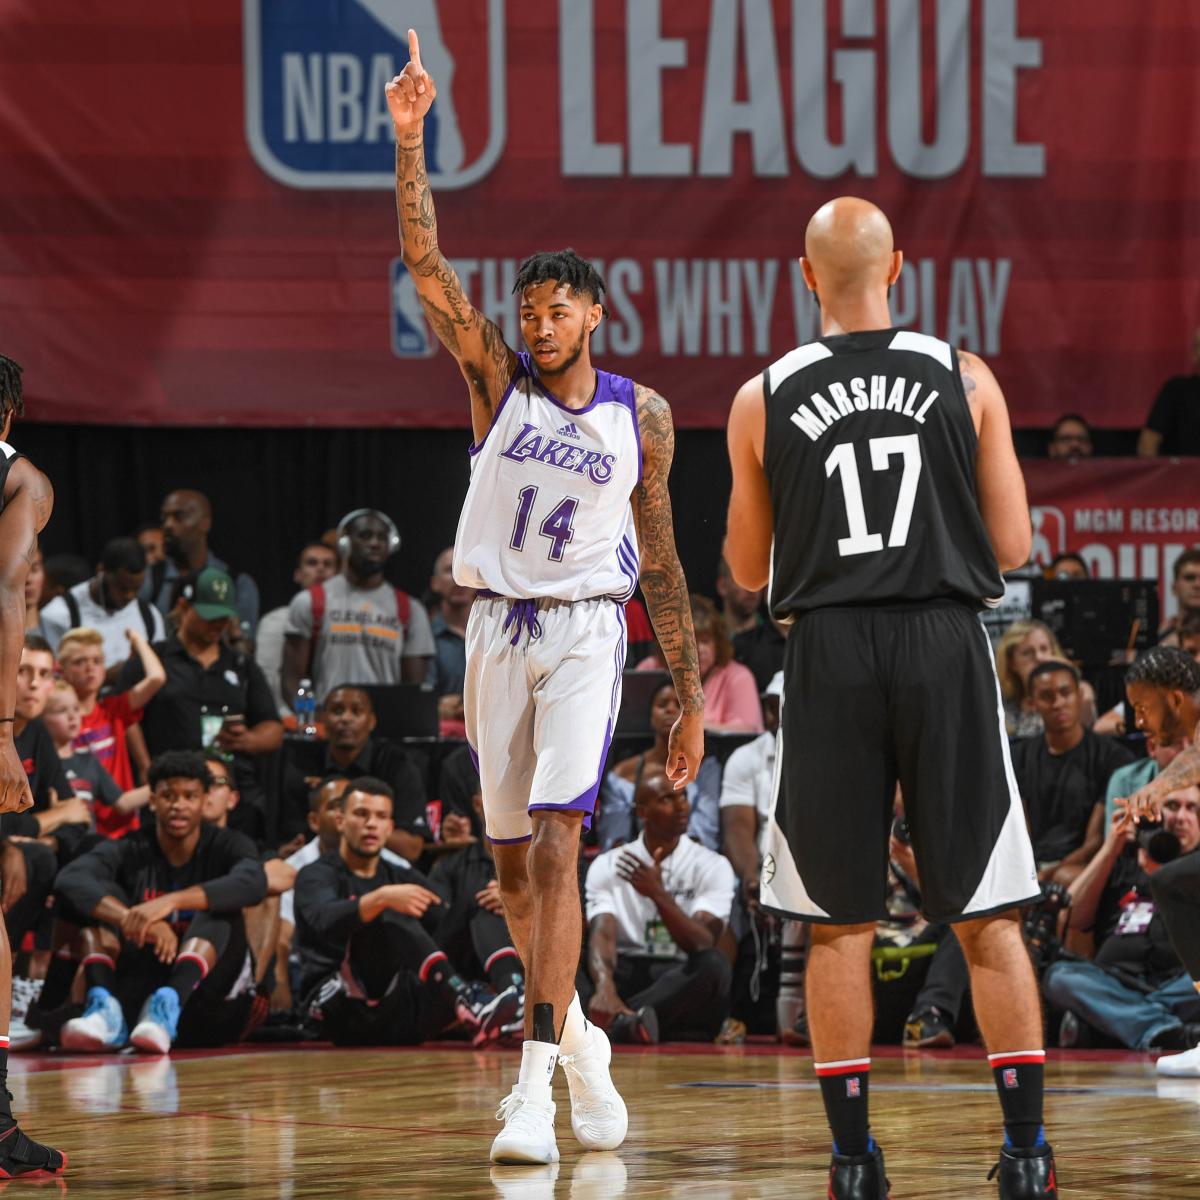 Lakers' Brandon Ingram Has Reportedly Grown to 6'11" and Changed